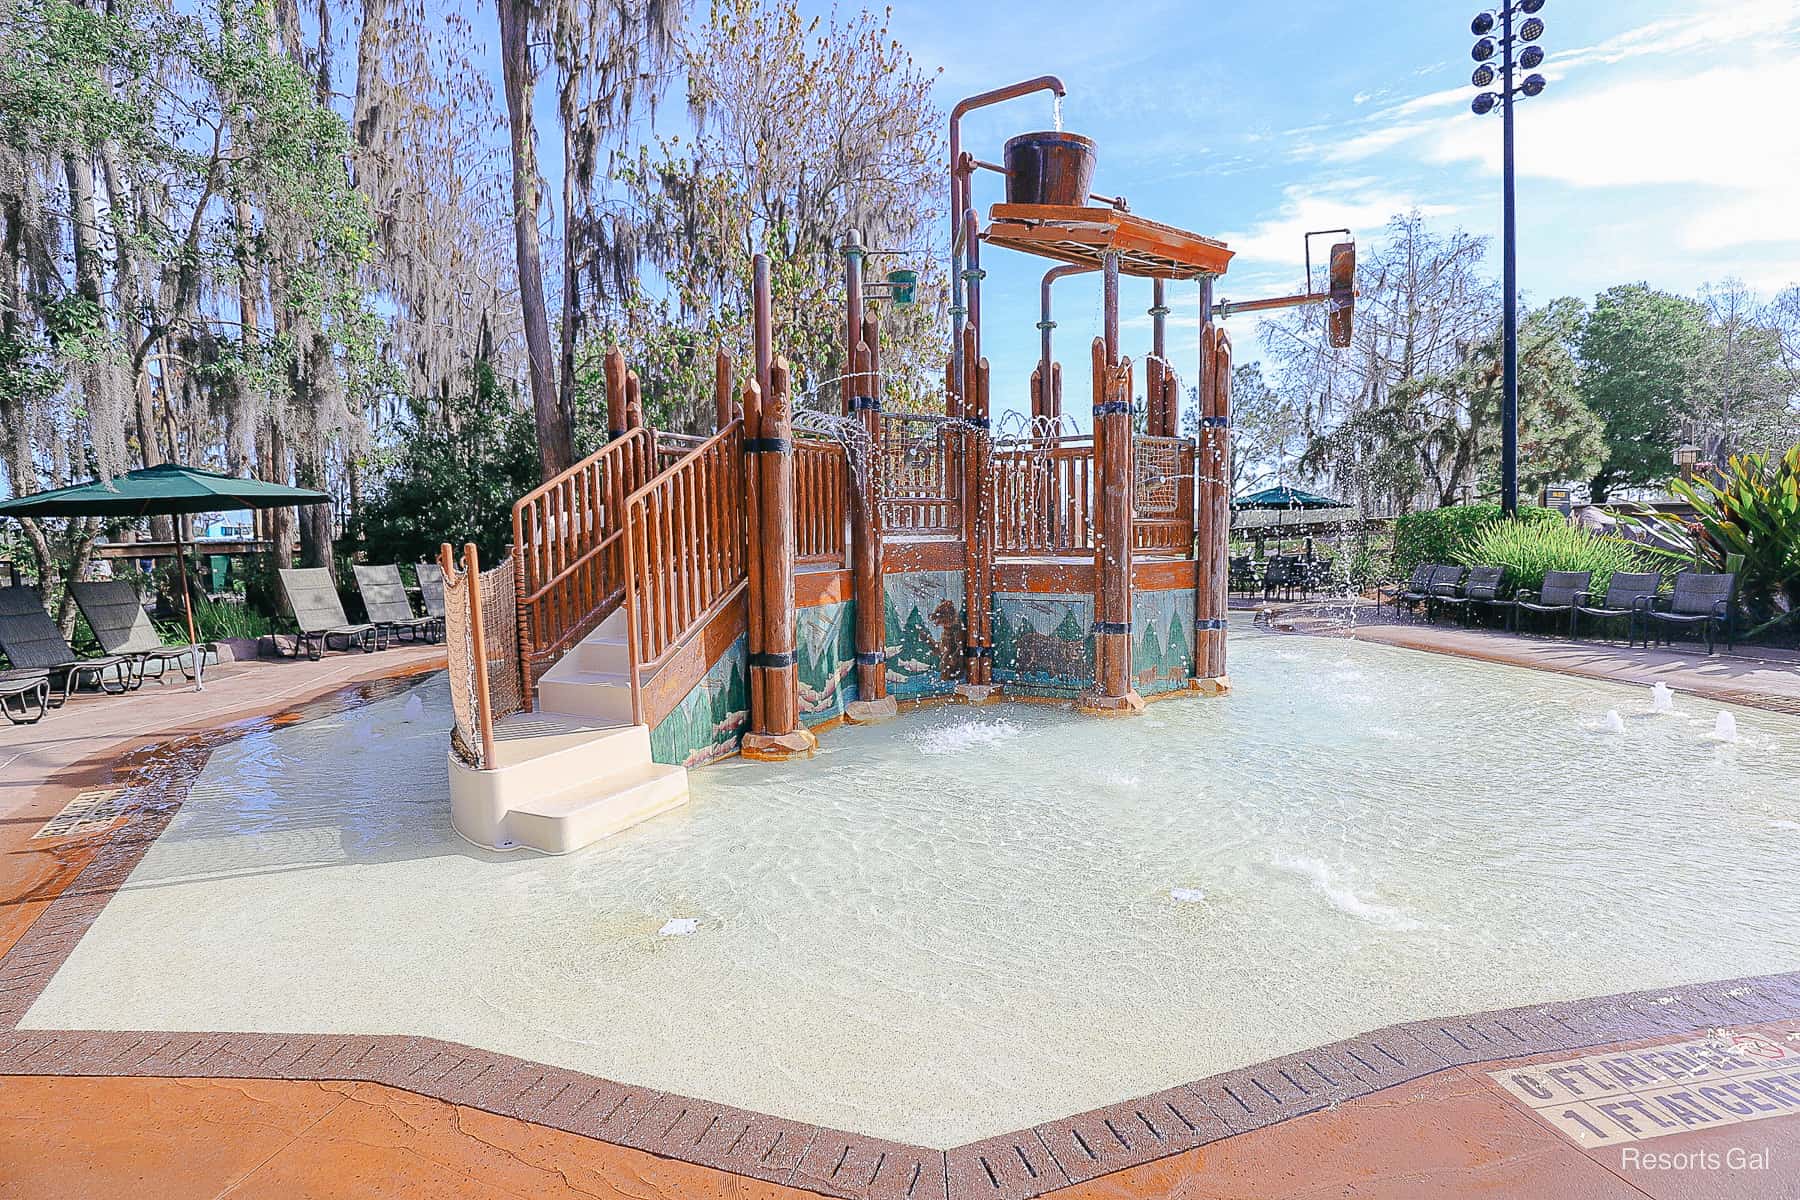 an aquatic play area in a separately fenced area designed for children 